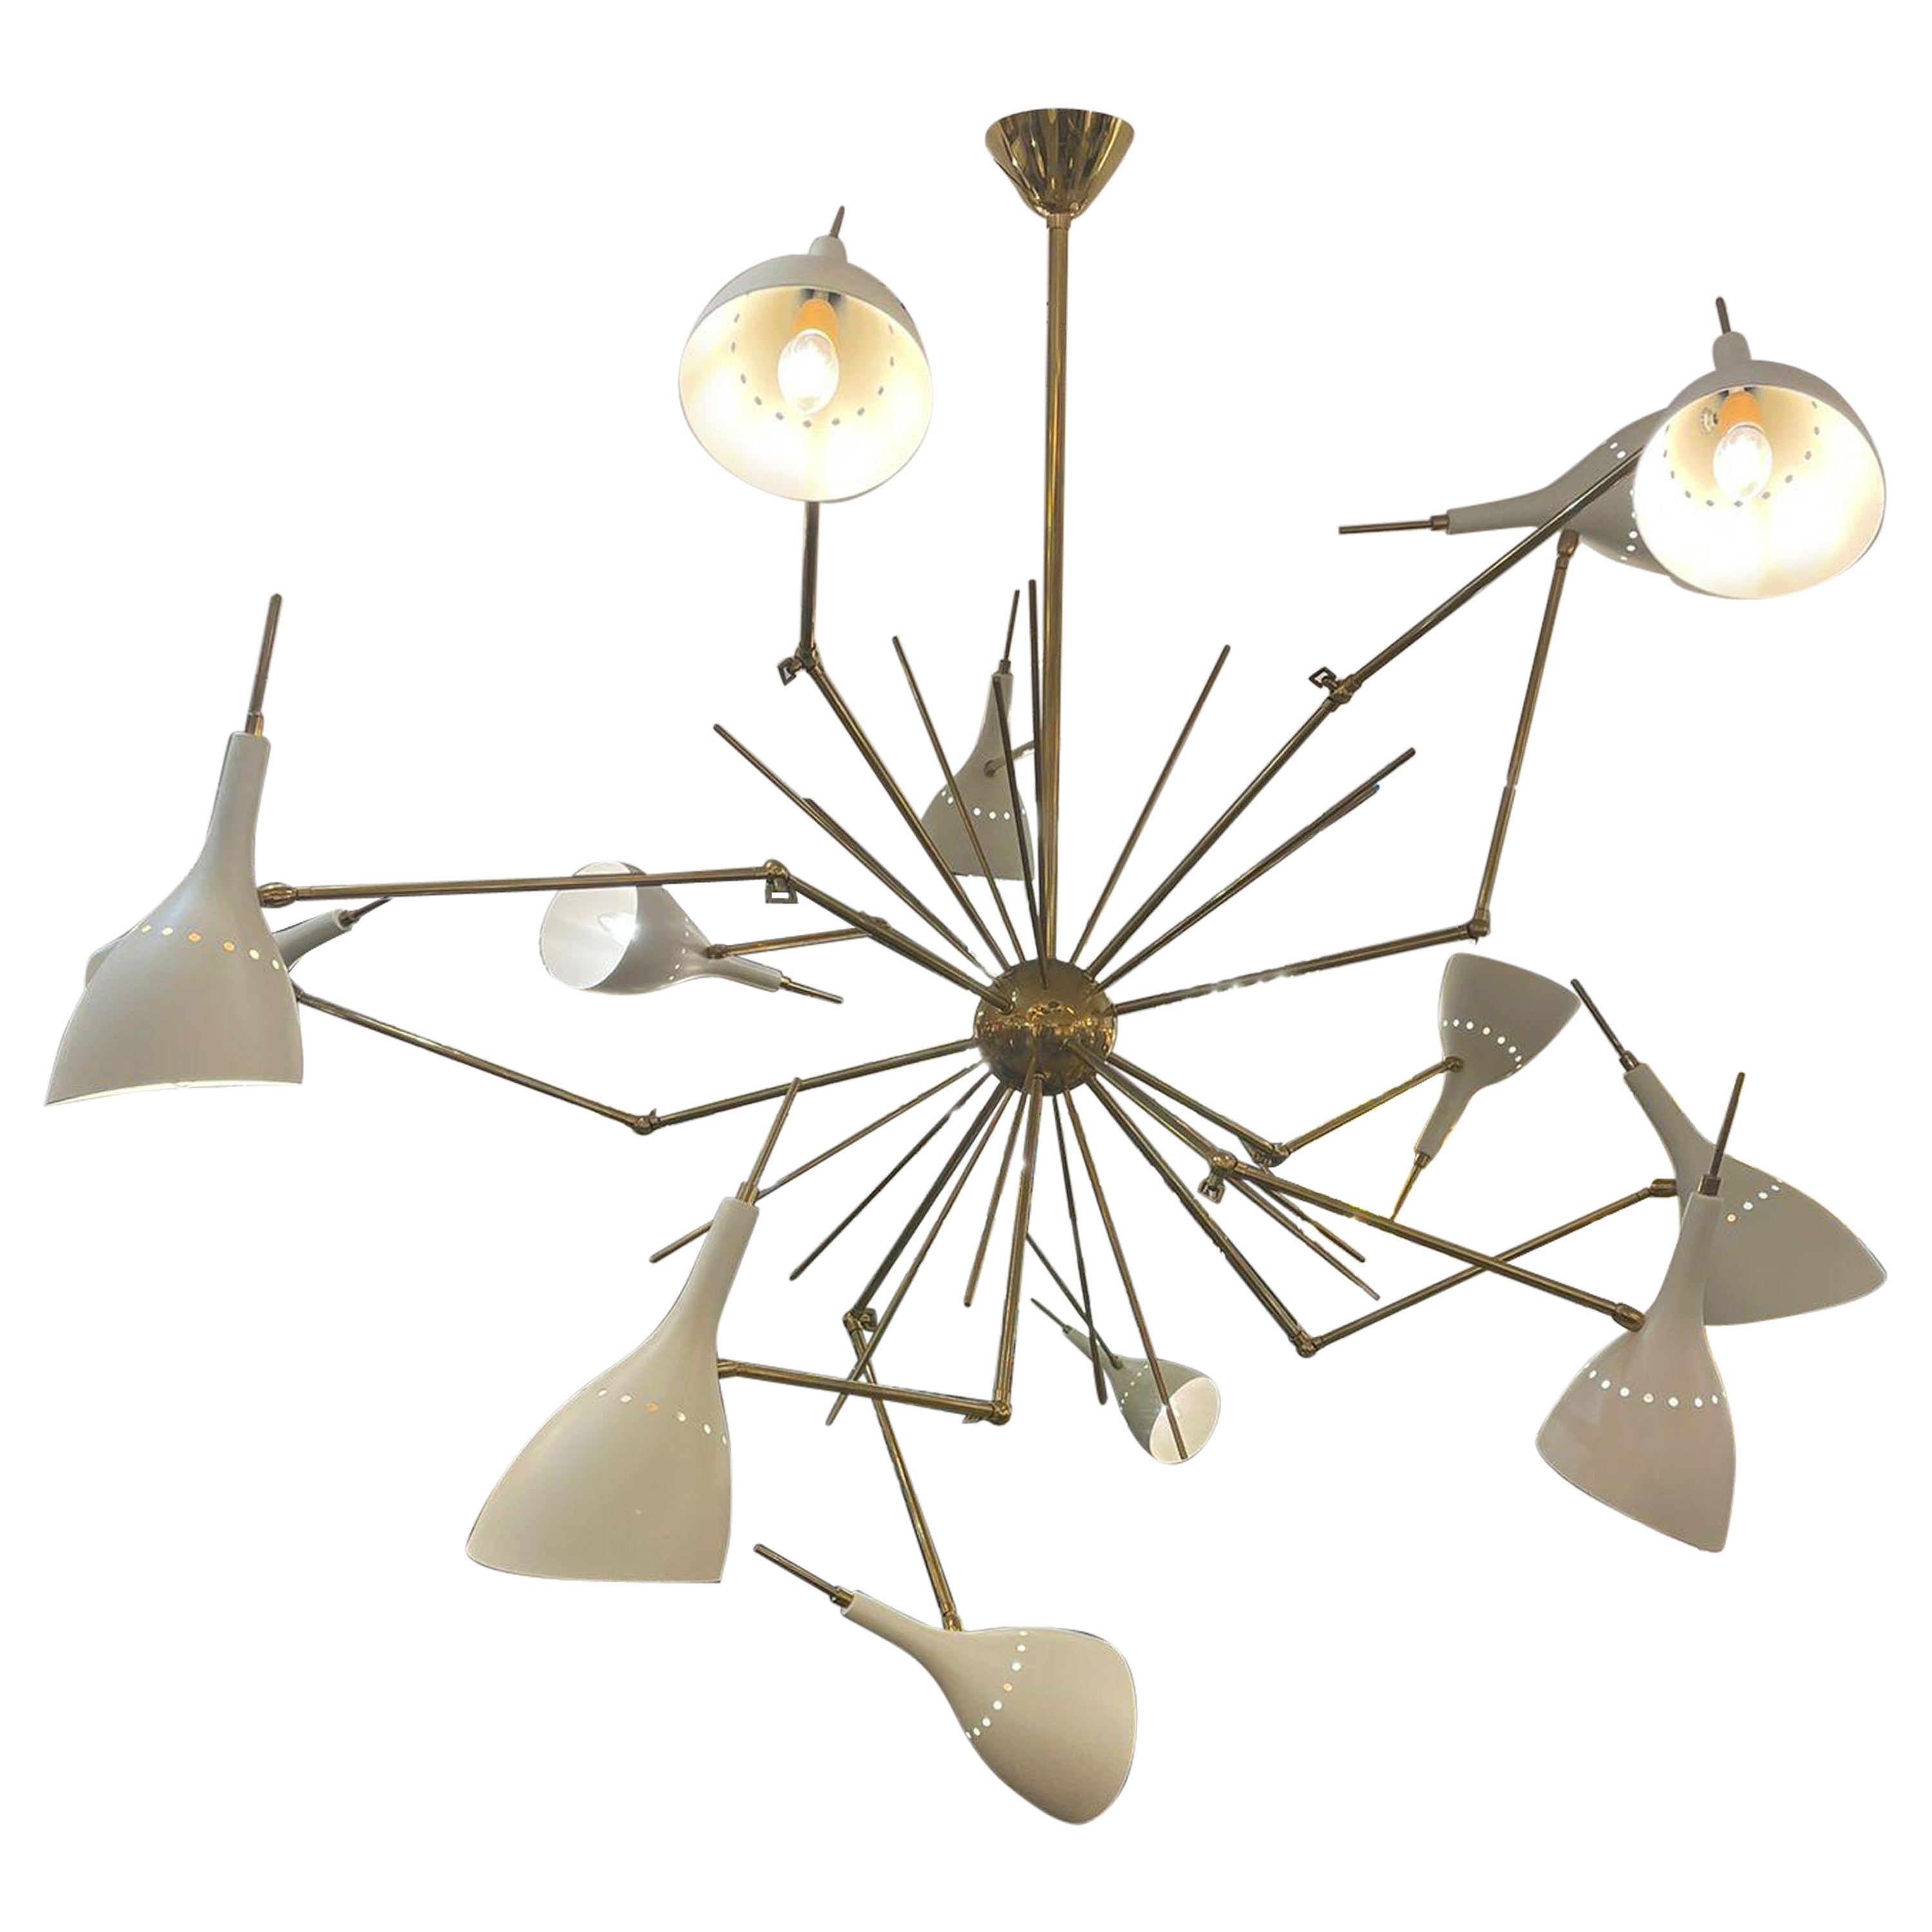 Brass Chandelier "Spider" with 12 Ivory Shades, Italy 1970s For Sale